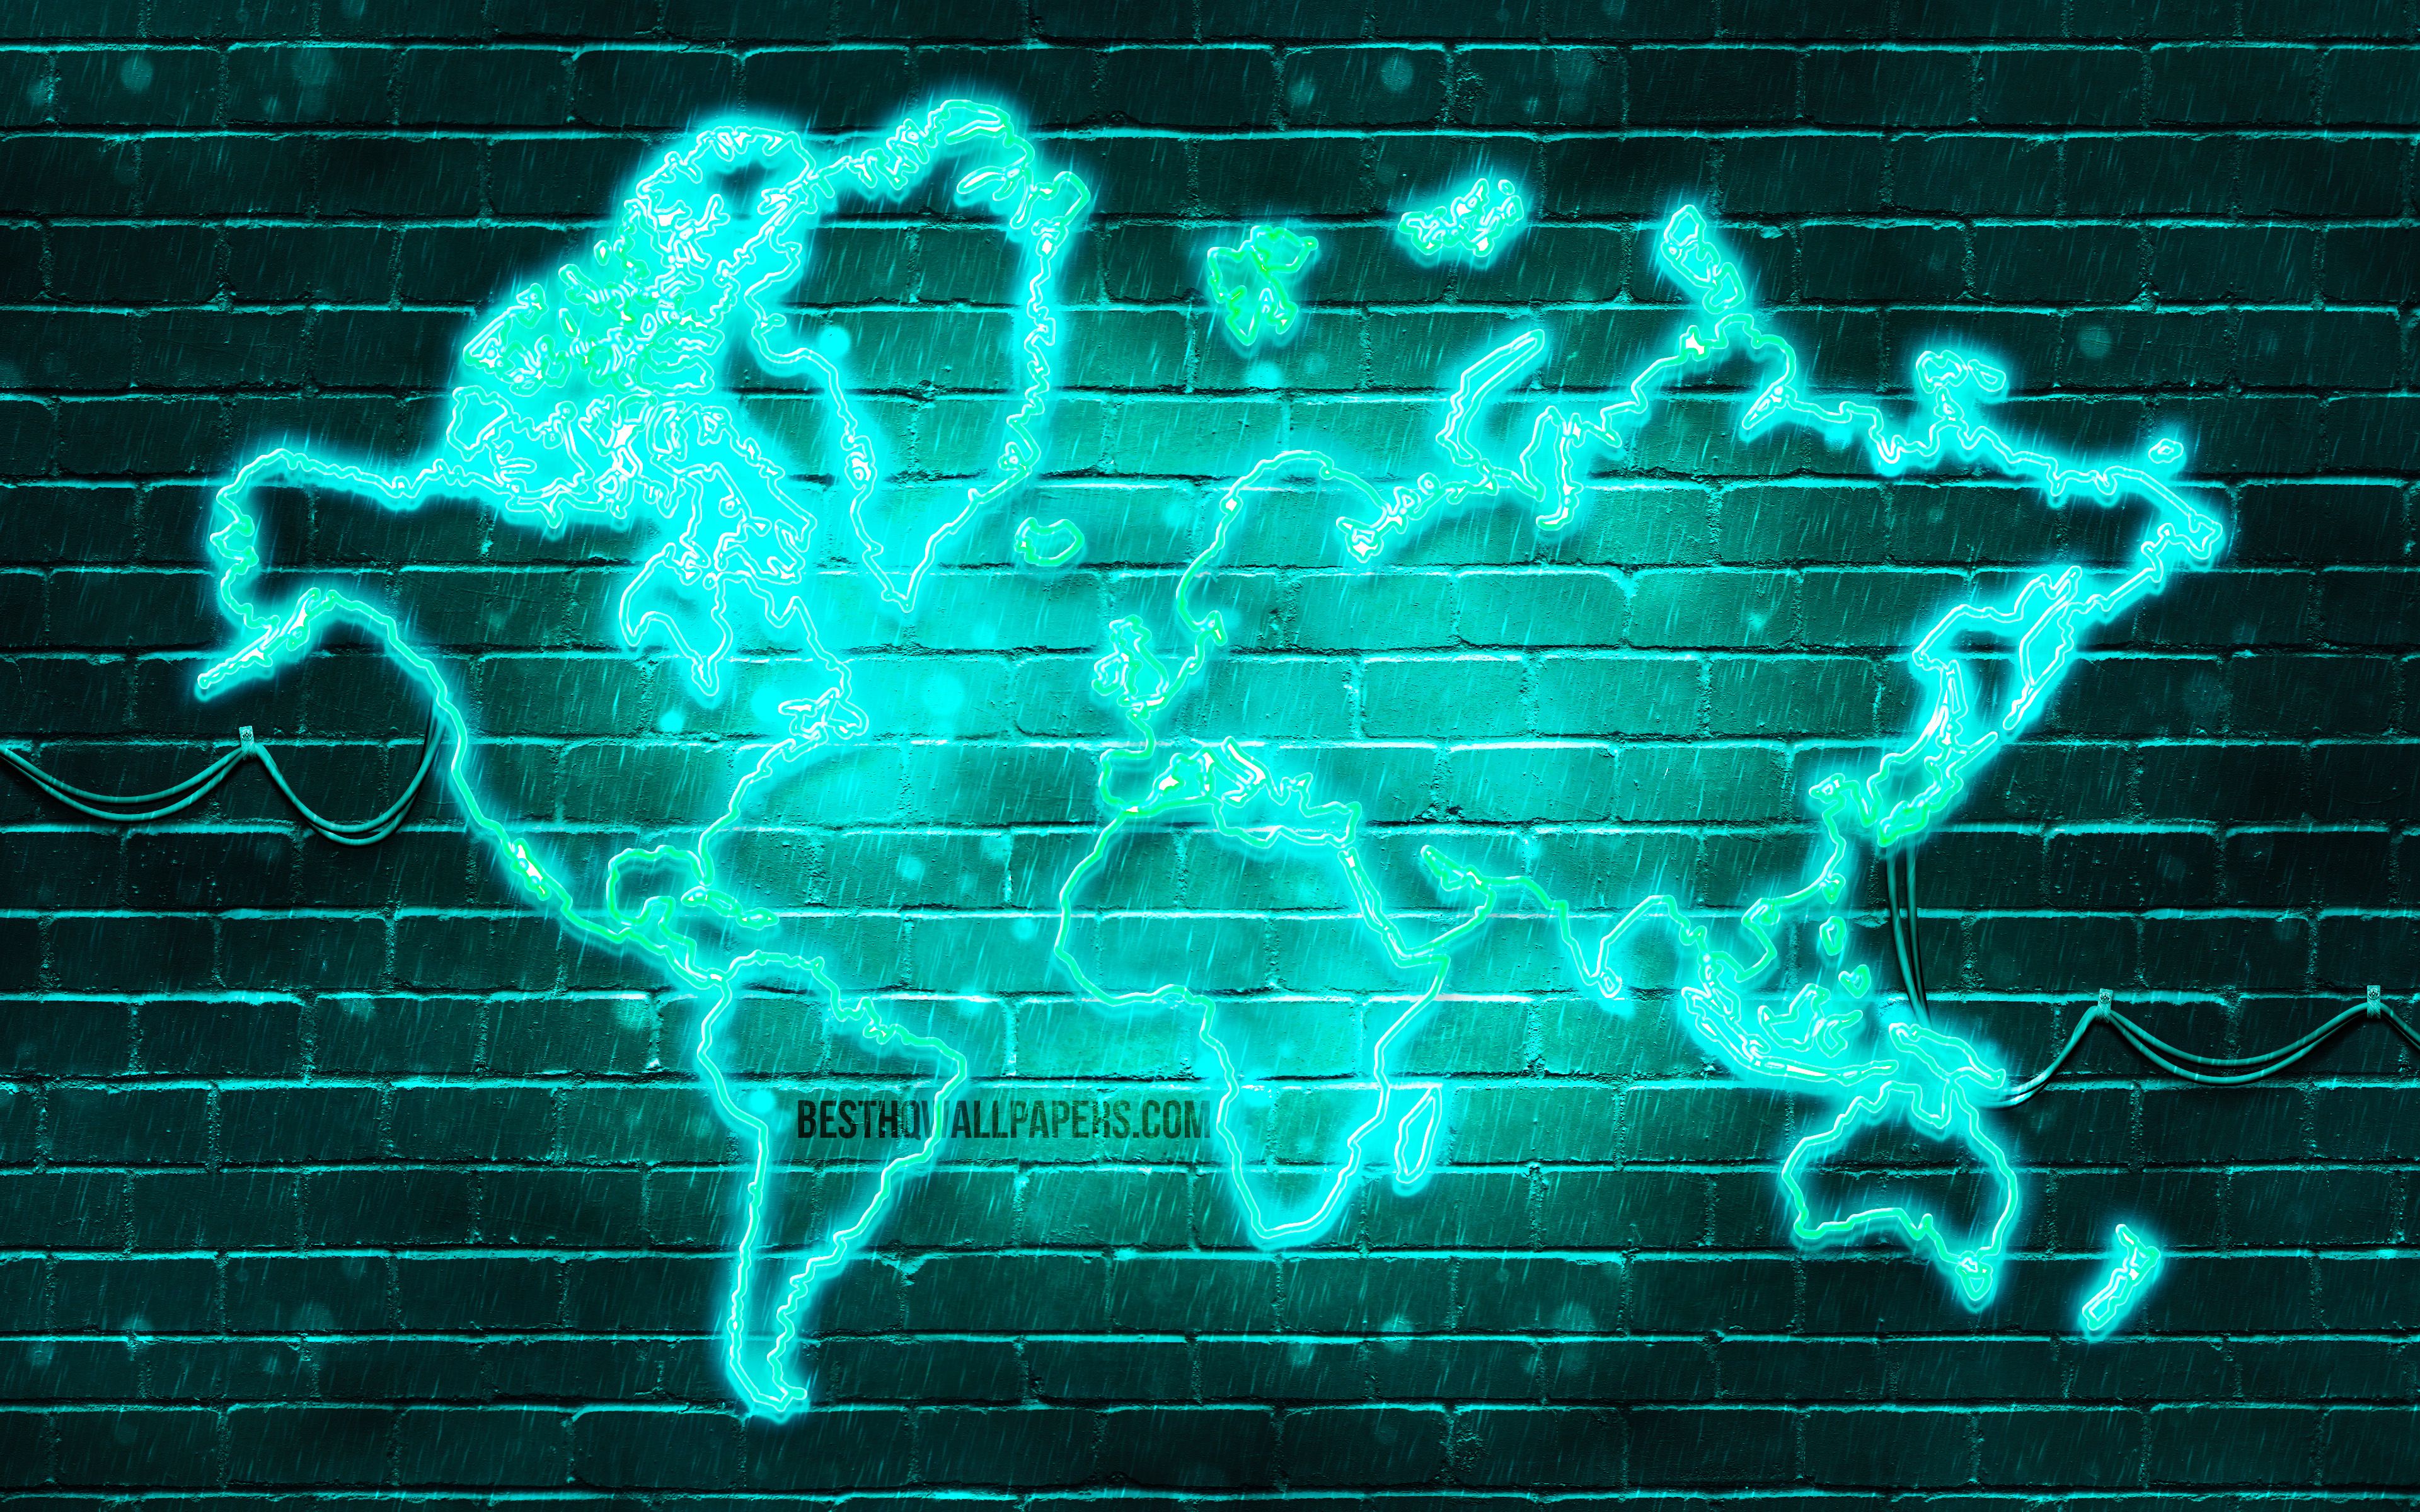 Download wallpaper Turquoise neon World Map, 4k, turquoise brickwall, World Map Concept, Purple World Map, World Maps for desktop with resolution 3840x2400. High Quality HD picture wallpaper